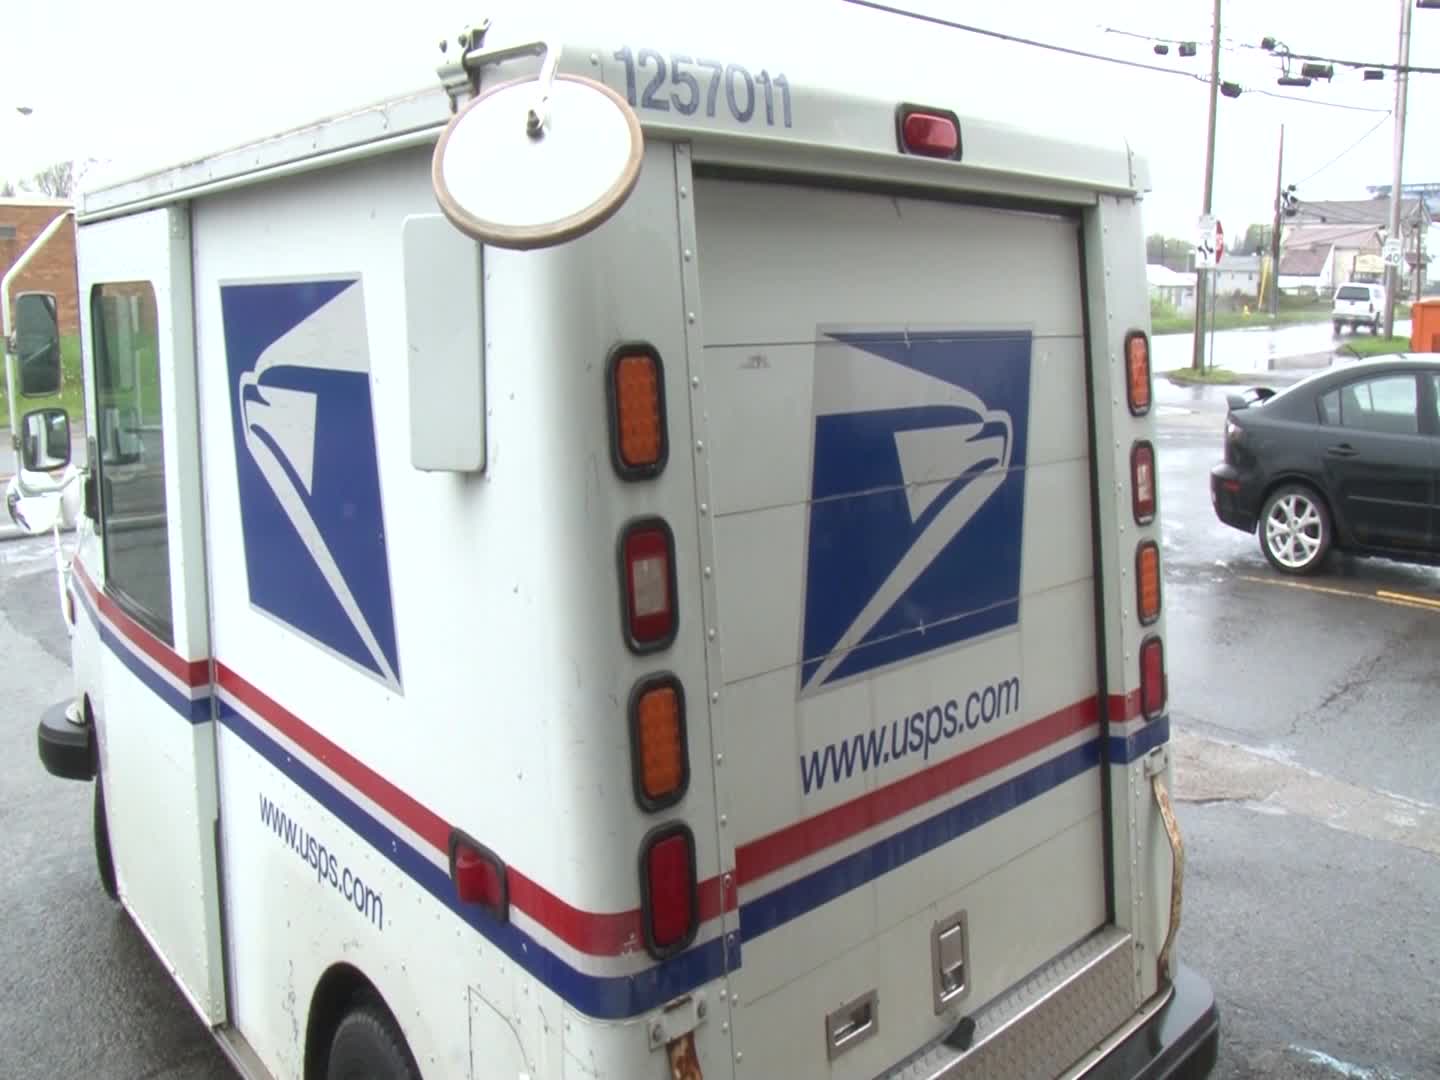 Thumbnail for the video titled "Virginia lawmakers want House and Senate leadership to include USPS in next relief package"